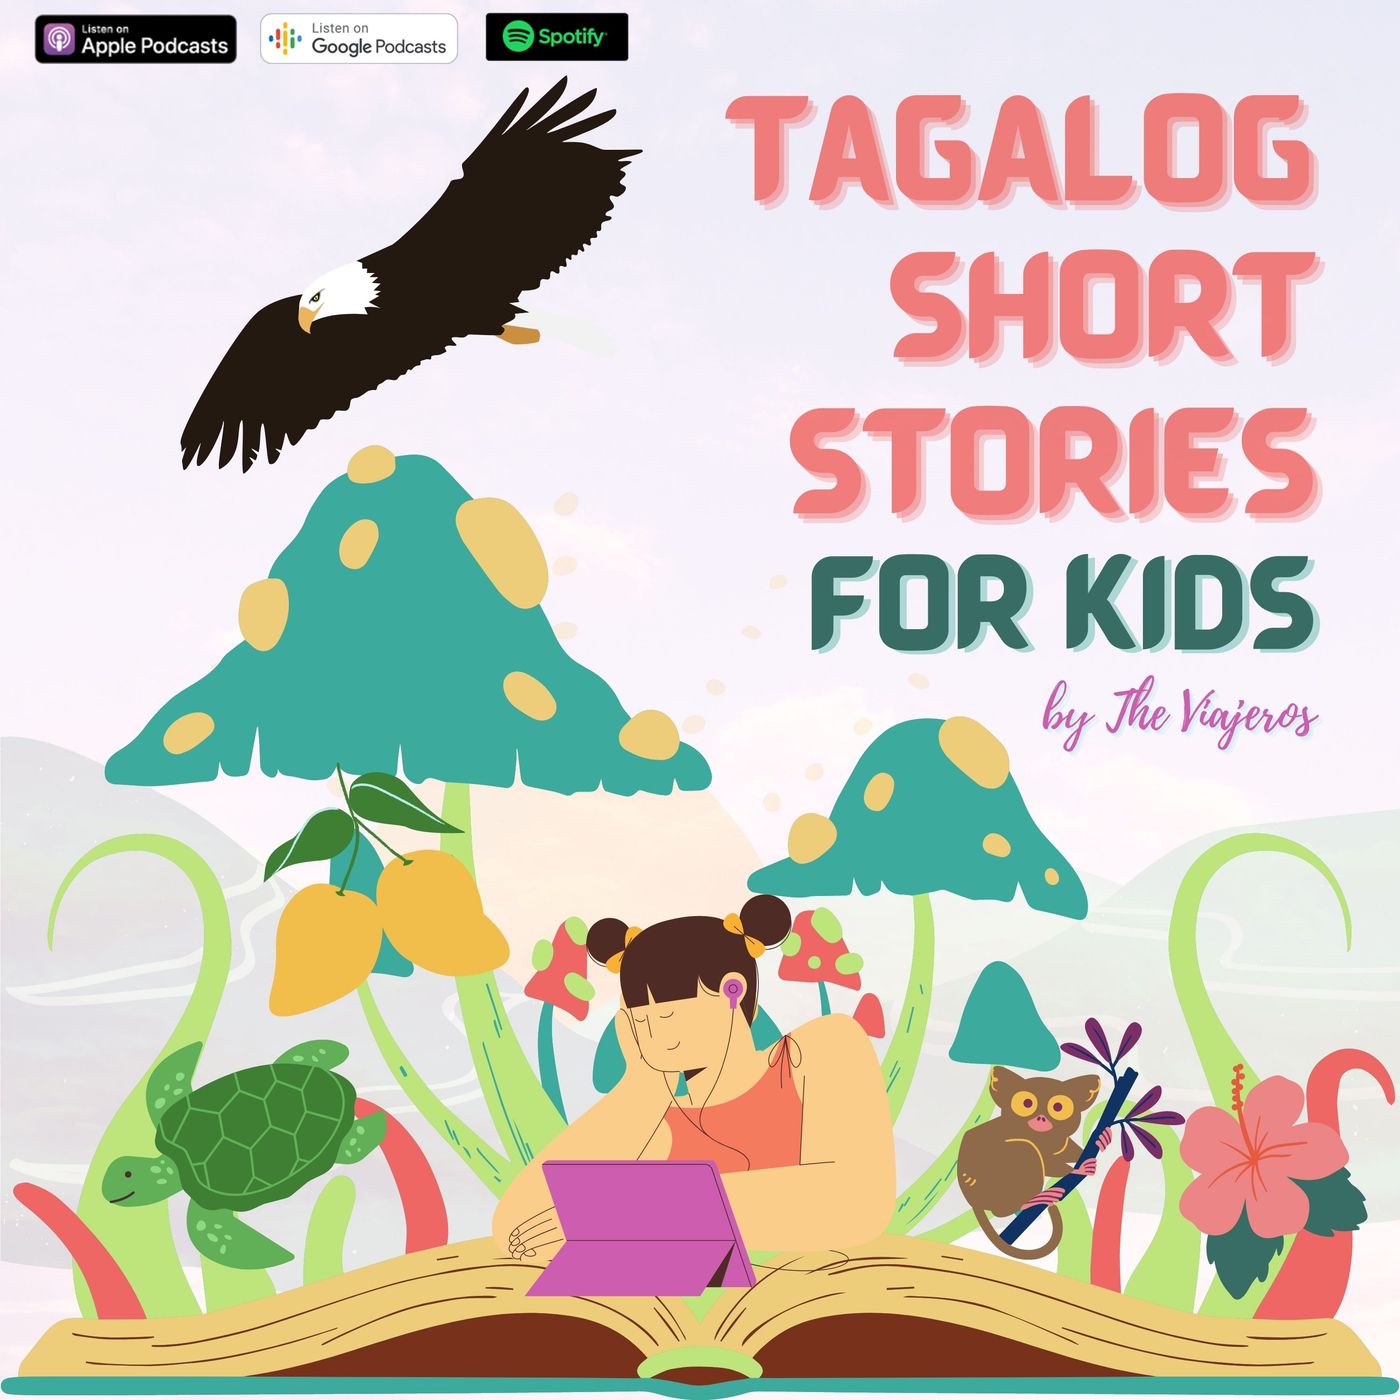 examples of short stories translated in tagalog